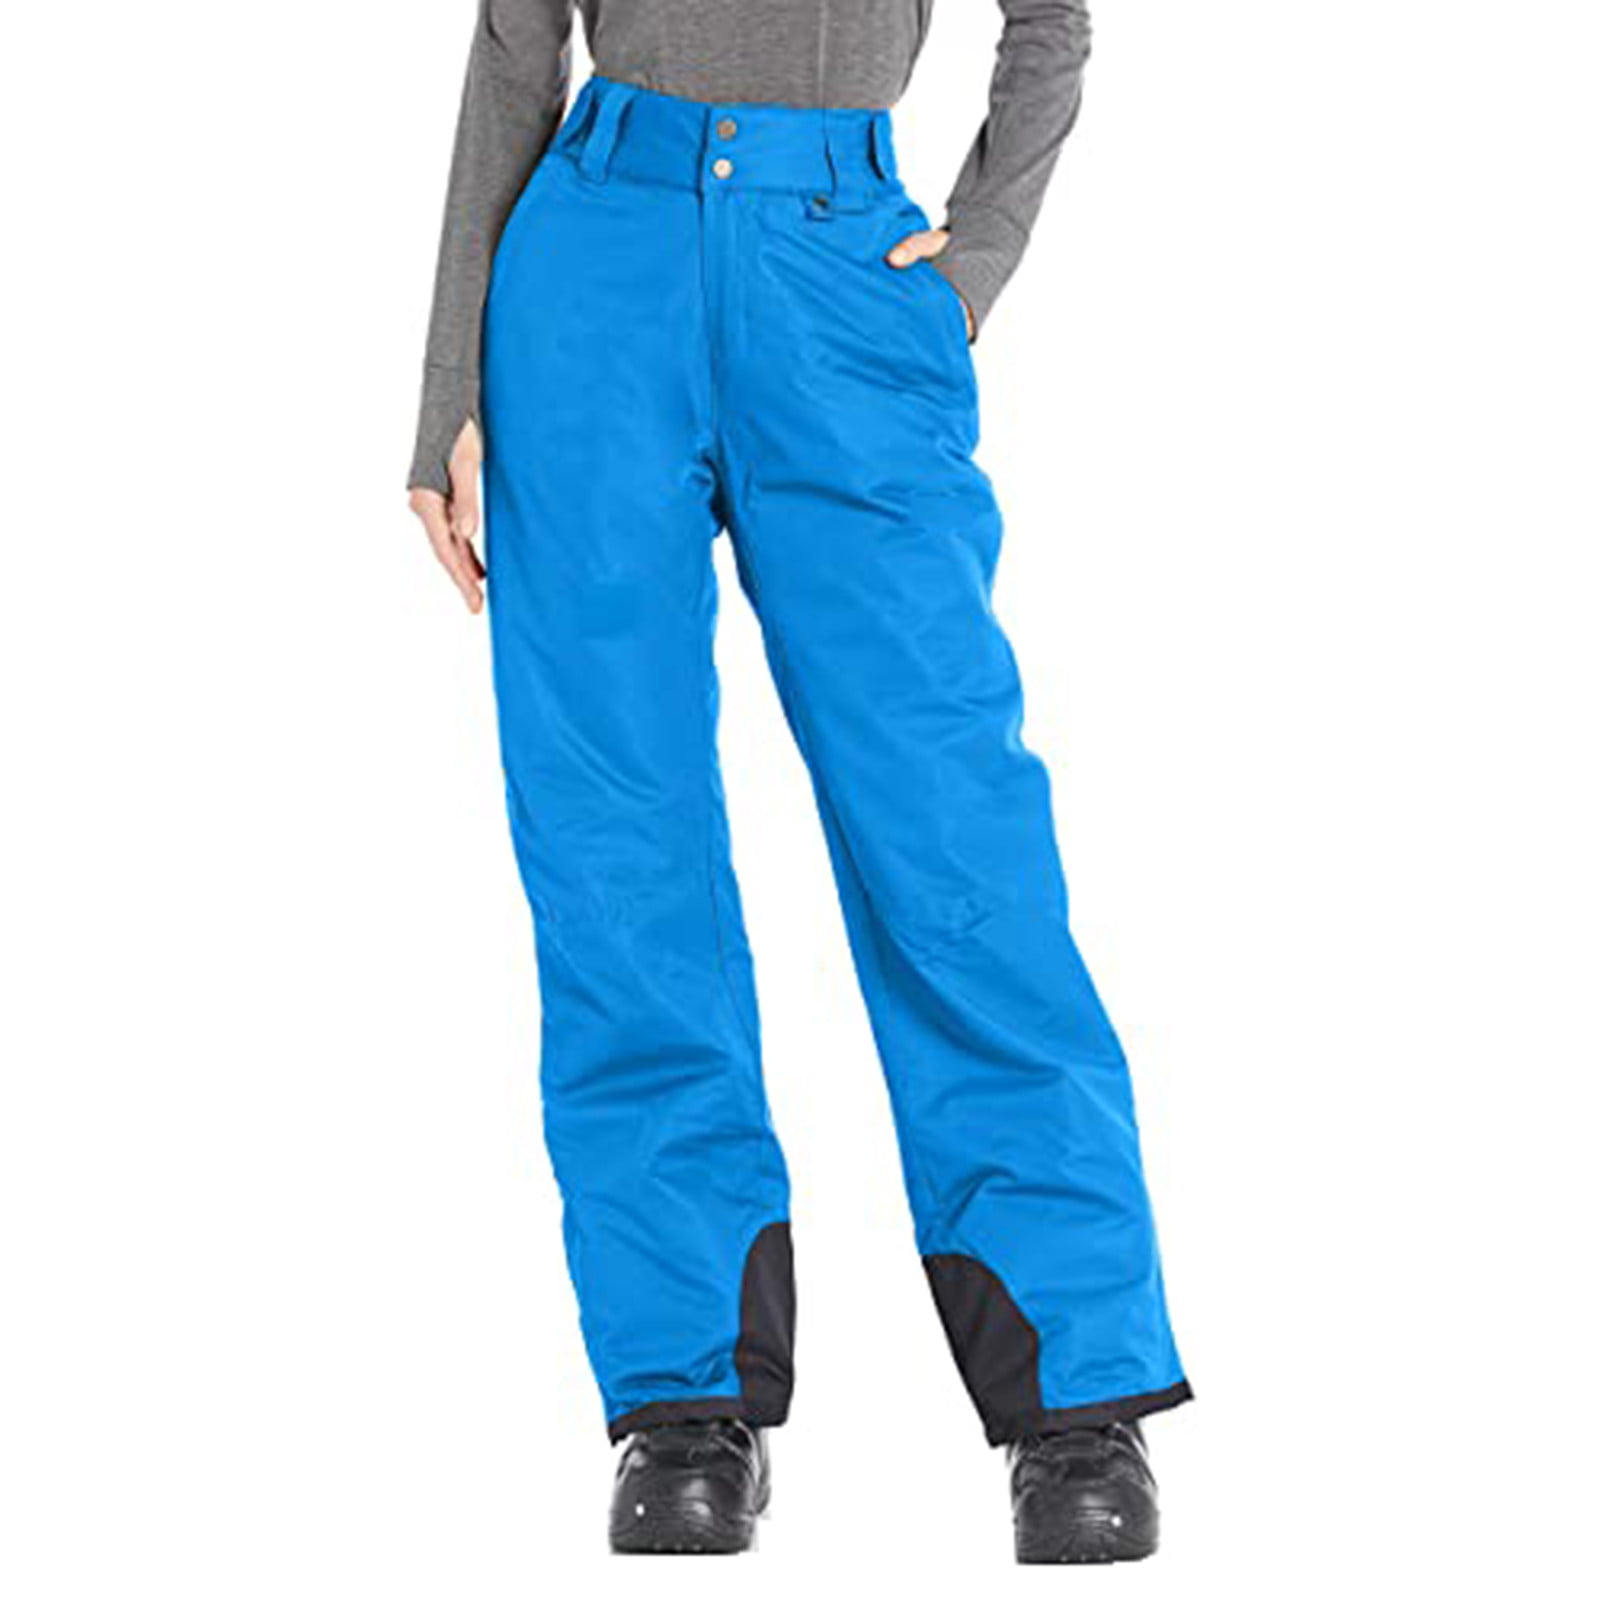 Details about   Unisex Women Men's Essential Snow Pants Sports Insulated Cargo Bib Overalls Pant 